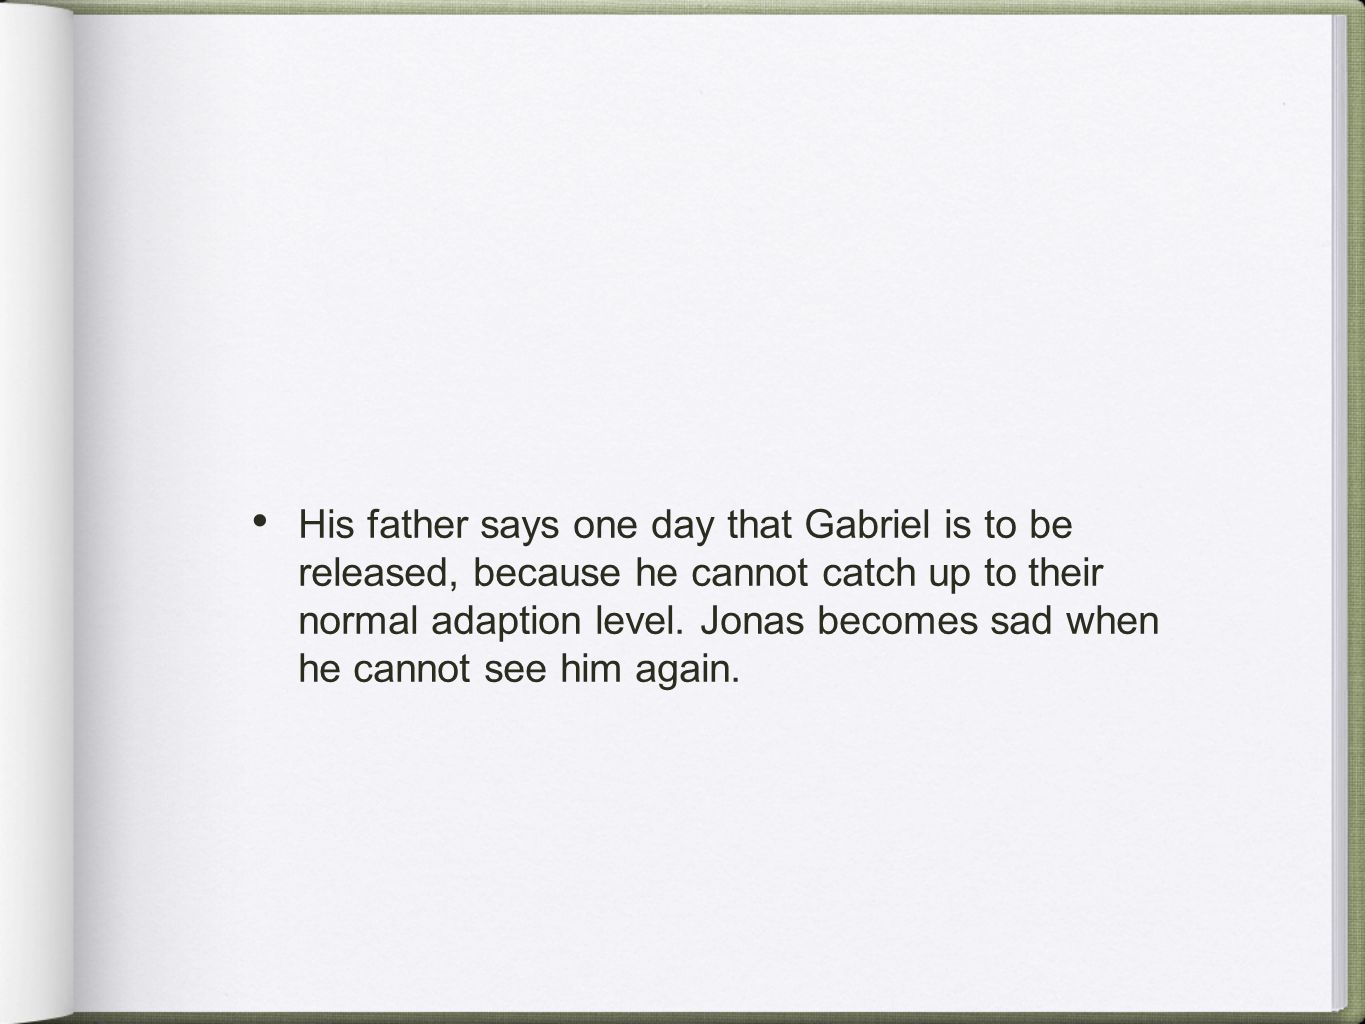 His father says one day that Gabriel is to be released, because he cannot catch up to their normal adaption level.